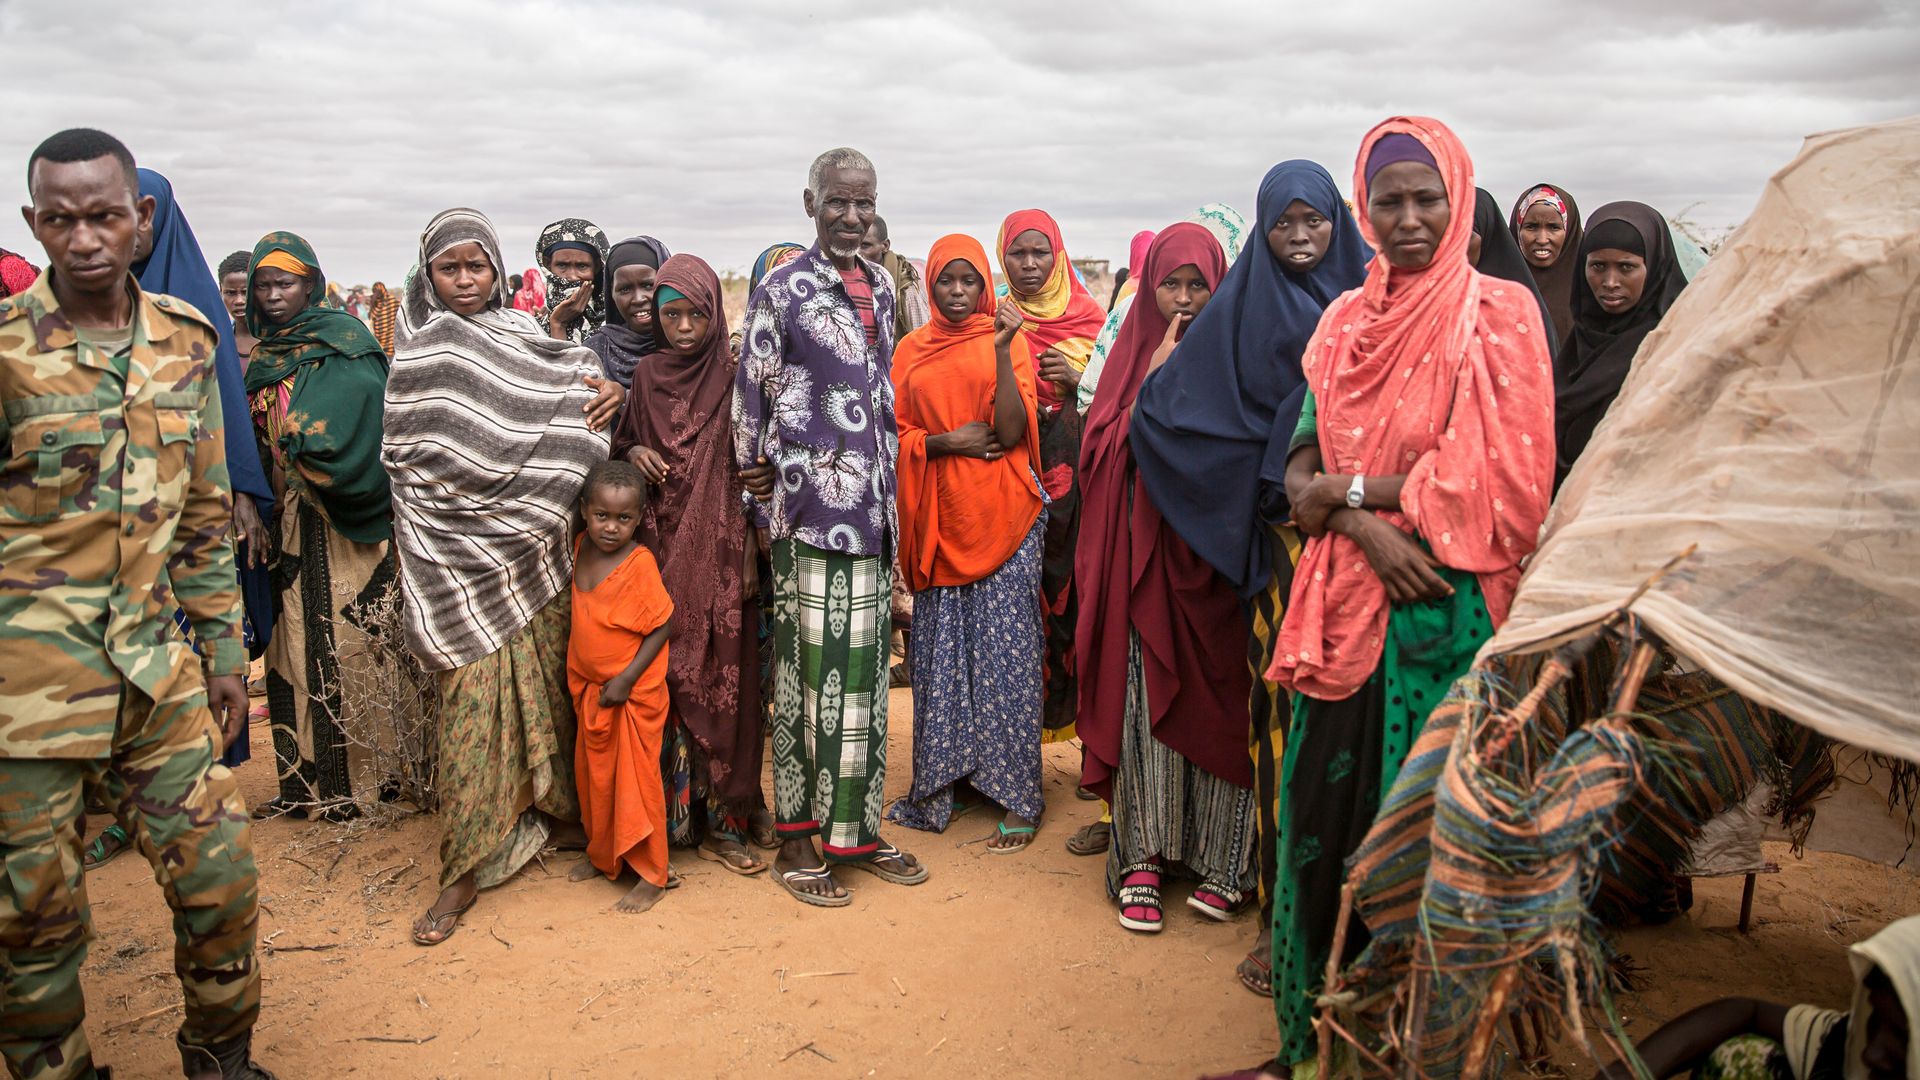 People displaced due to the drought wait for assistance in a camp on the outskirts of Dollow, Somalia. Photo: Sally Hayden/SOPA Images/LightRocket via Getty Images 